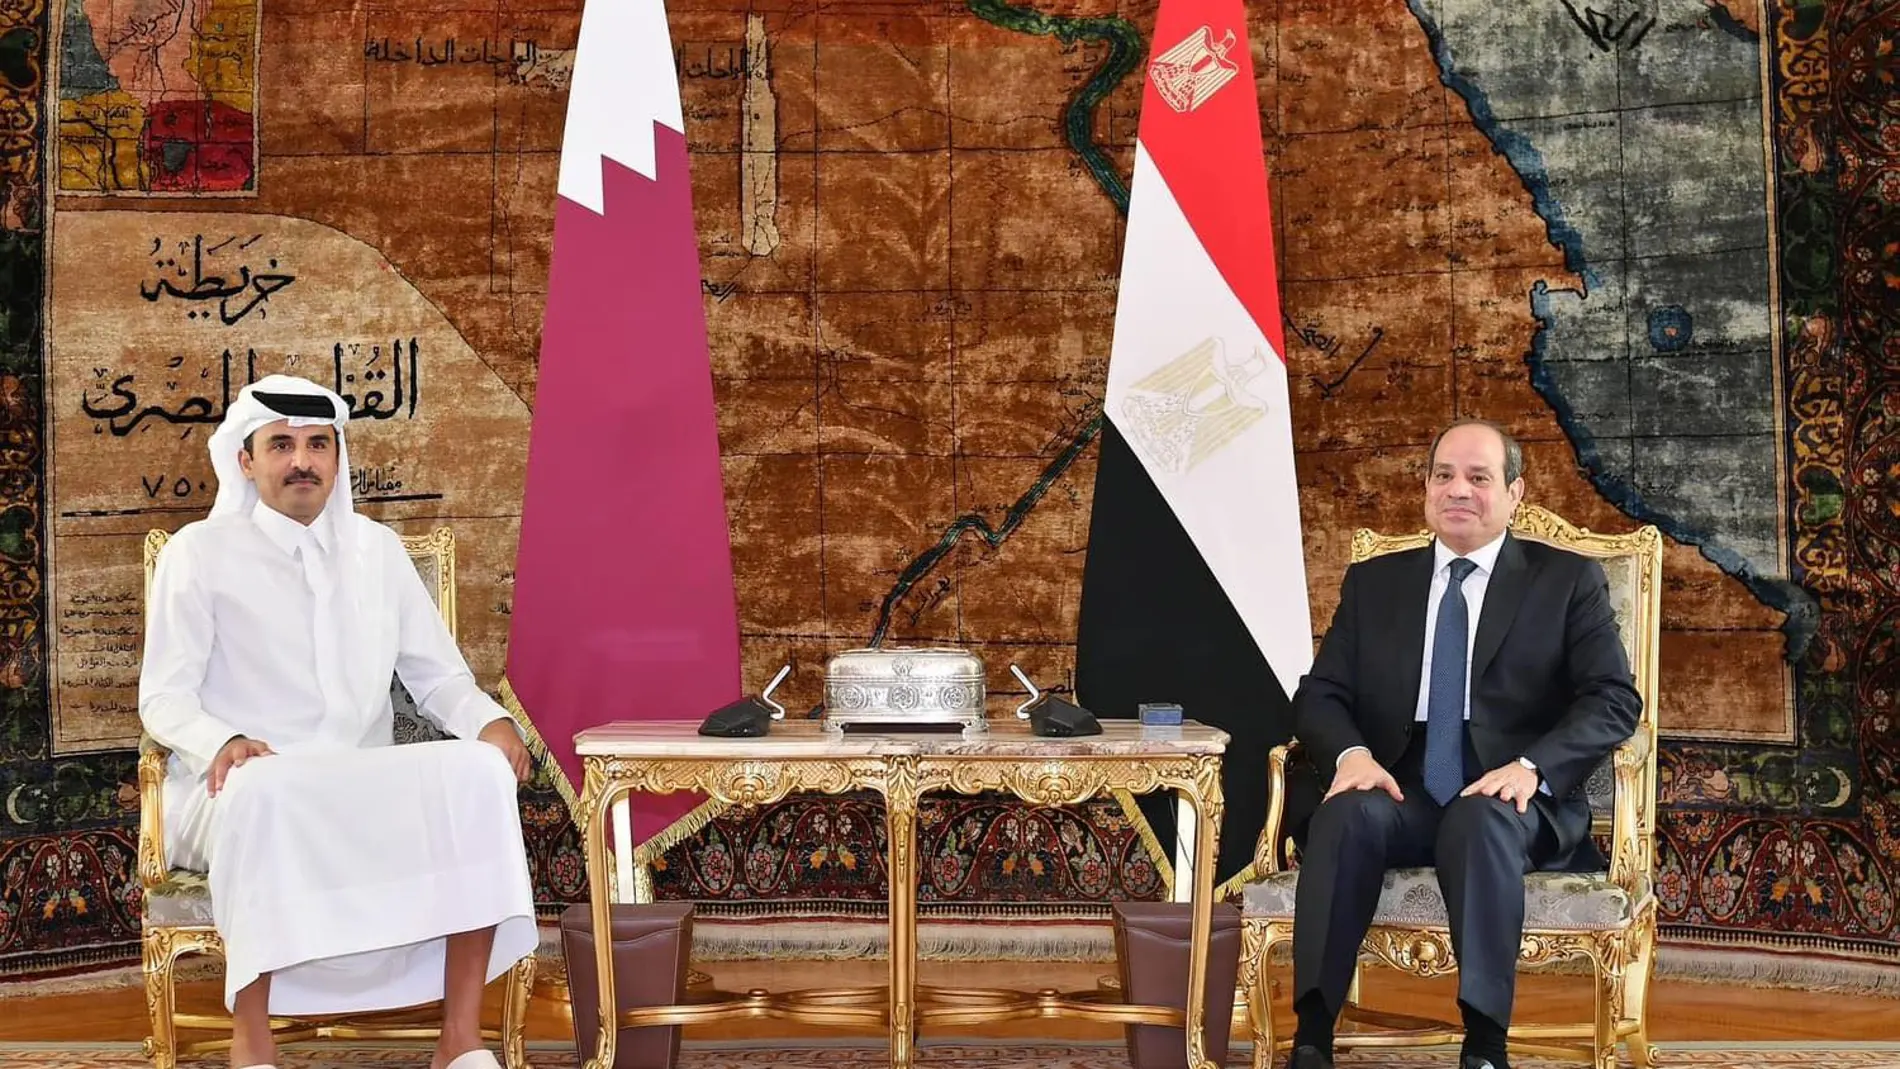 CAIRO, Nov. 10, 2023 -- Egyptian President Abdel-Fattah al-Sisi (R) meets with Qatari Emir Sheikh Tamim bin Hamad Al Thani in Cairo, Egypt, on Nov. 10, 2023. Egyptian President Abdel-Fattah al-Sisi and the visiting Qatari Emir Sheikh Tamim bin Hamad Al Thani discussed on Friday the Israeli military escalations in the Gaza Strip and their regional repercussions, the Egyptian presidency said in a statement. (Foto de ARCHIVO) 10/11/2023